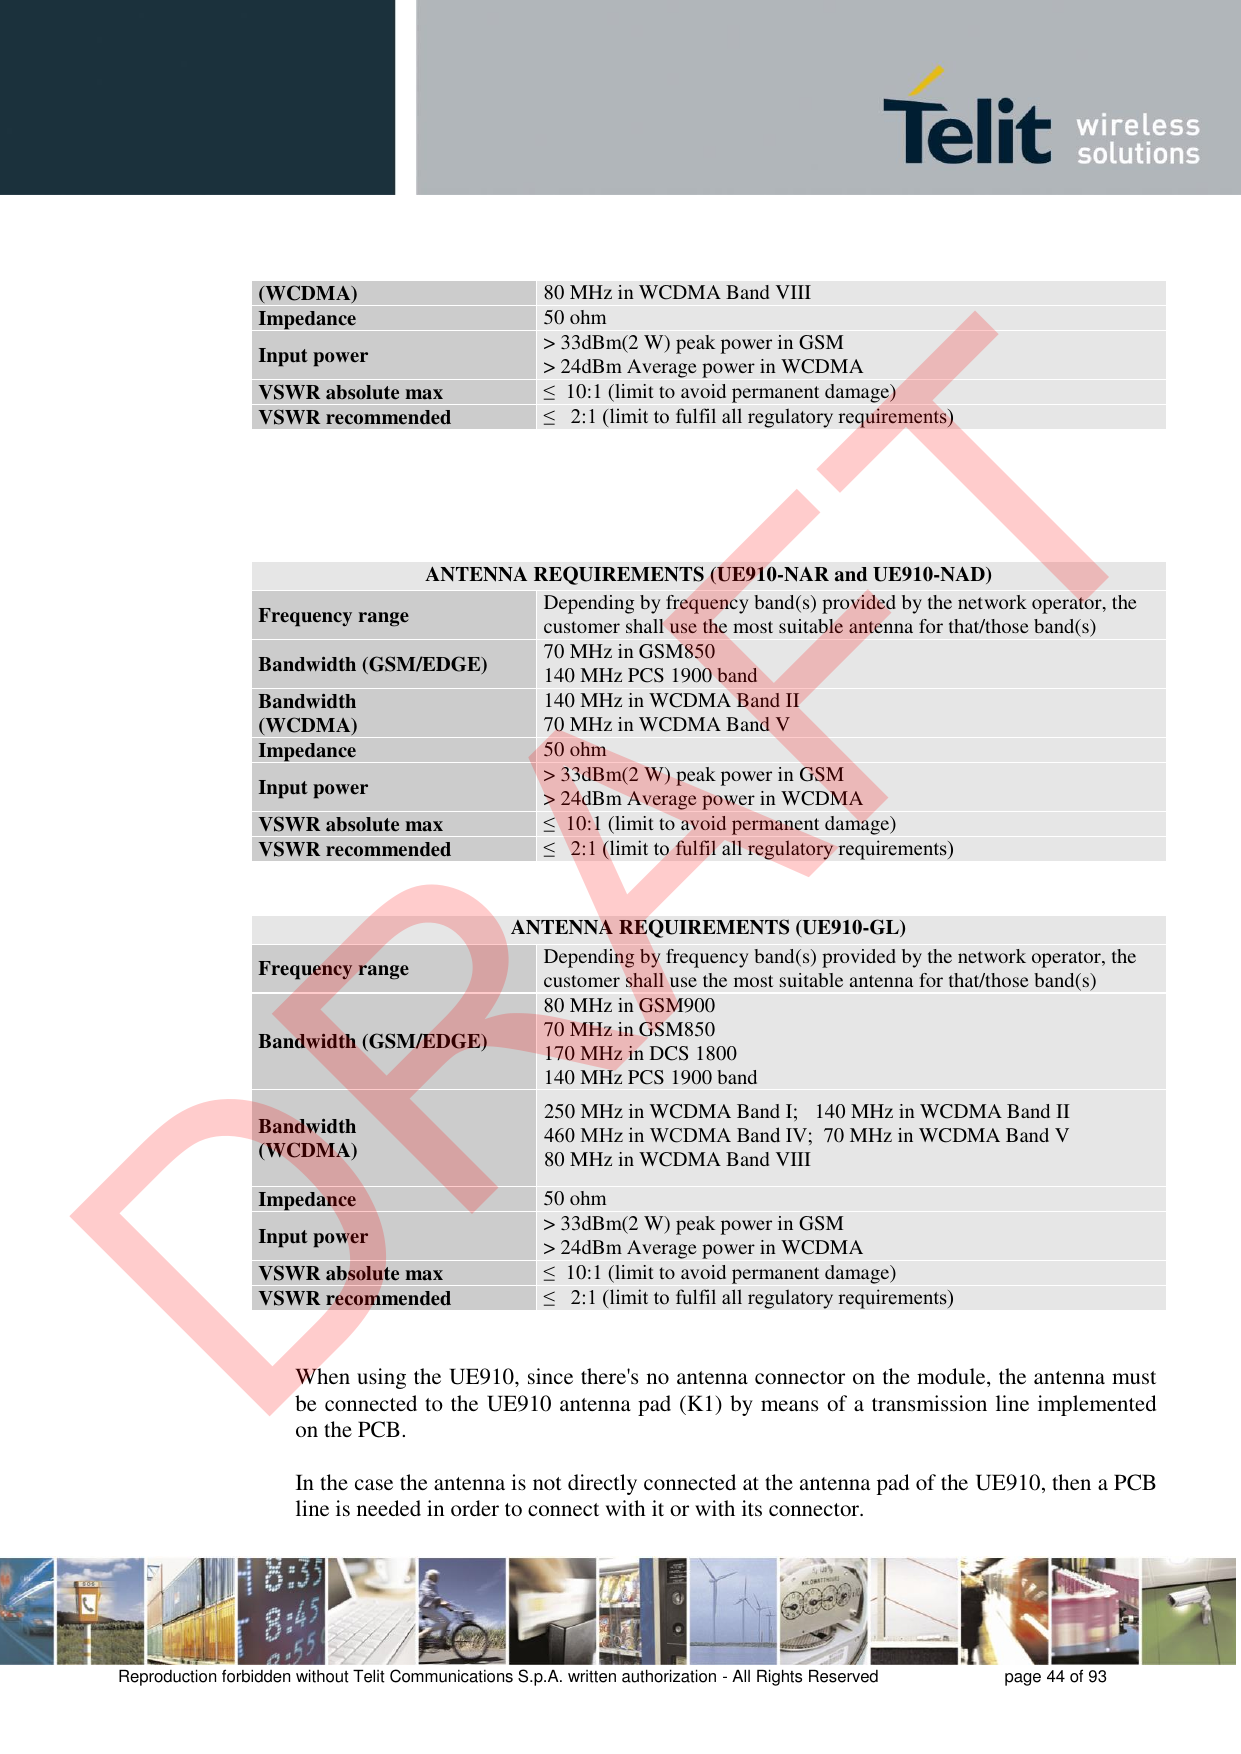 Reproduction forbidden without Telit Communications S.p.A. written authorization - All Rights Reserved  page 44 of 93 (WCDMA) 80 MHz in WCDMA Band VIII Impedance 50 ohm Input power &gt; 33dBm(2 W) peak power in GSM&gt; 24dBm Average power in WCDMAVSWR absolute max ≤  10:1 (limit to avoid permanent damage) VSWR recommended ≤   2:1 (limit to fulfil all regulatory requirements) ANTENNA REQUIREMENTS (UE910-NAR and UE910-NAD) Frequency range Depending by frequency band(s) provided by the network operator, the customer shall use the most suitable antenna for that/those band(s) Bandwidth (GSM/EDGE) 70 MHz in GSM850 140 MHz PCS 1900 band Bandwidth (WCDMA) 140 MHz in WCDMA Band II 70 MHz in WCDMA Band V  Impedance 50 ohm Input power &gt; 33dBm(2 W) peak power in GSM&gt; 24dBm Average power in WCDMAVSWR absolute max ≤  10:1 (limit to avoid permanent damage) VSWR recommended ≤   2:1 (limit to fulfil all regulatory requirements) ANTENNA REQUIREMENTS (UE910-GL) Frequency range Depending by frequency band(s) provided by the network operator, the customer shall use the most suitable antenna for that/those band(s) Bandwidth (GSM/EDGE) 80 MHz in GSM900 70 MHz in GSM850 170 MHz in DCS 1800 140 MHz PCS 1900 band Bandwidth (WCDMA) 250 MHz in WCDMA Band I;   140 MHz in WCDMA Band II460 MHz in WCDMA Band IV;  70 MHz in WCDMA Band V  80 MHz in WCDMA Band VIII Impedance 50 ohm Input power &gt; 33dBm(2 W) peak power in GSM&gt; 24dBm Average power in WCDMAVSWR absolute max ≤  10:1 (limit to avoid permanent damage) VSWR recommended ≤   2:1 (limit to fulfil all regulatory requirements) When using the UE910, since there&apos;s no antenna connector on the module, the antenna must be connected to the UE910 antenna pad (K1) by means of a transmission line implemented on the PCB. In the case the antenna is not directly connected at the antenna pad of the UE910, then a PCB line is needed in order to connect with it or with its connector.  DRAFT